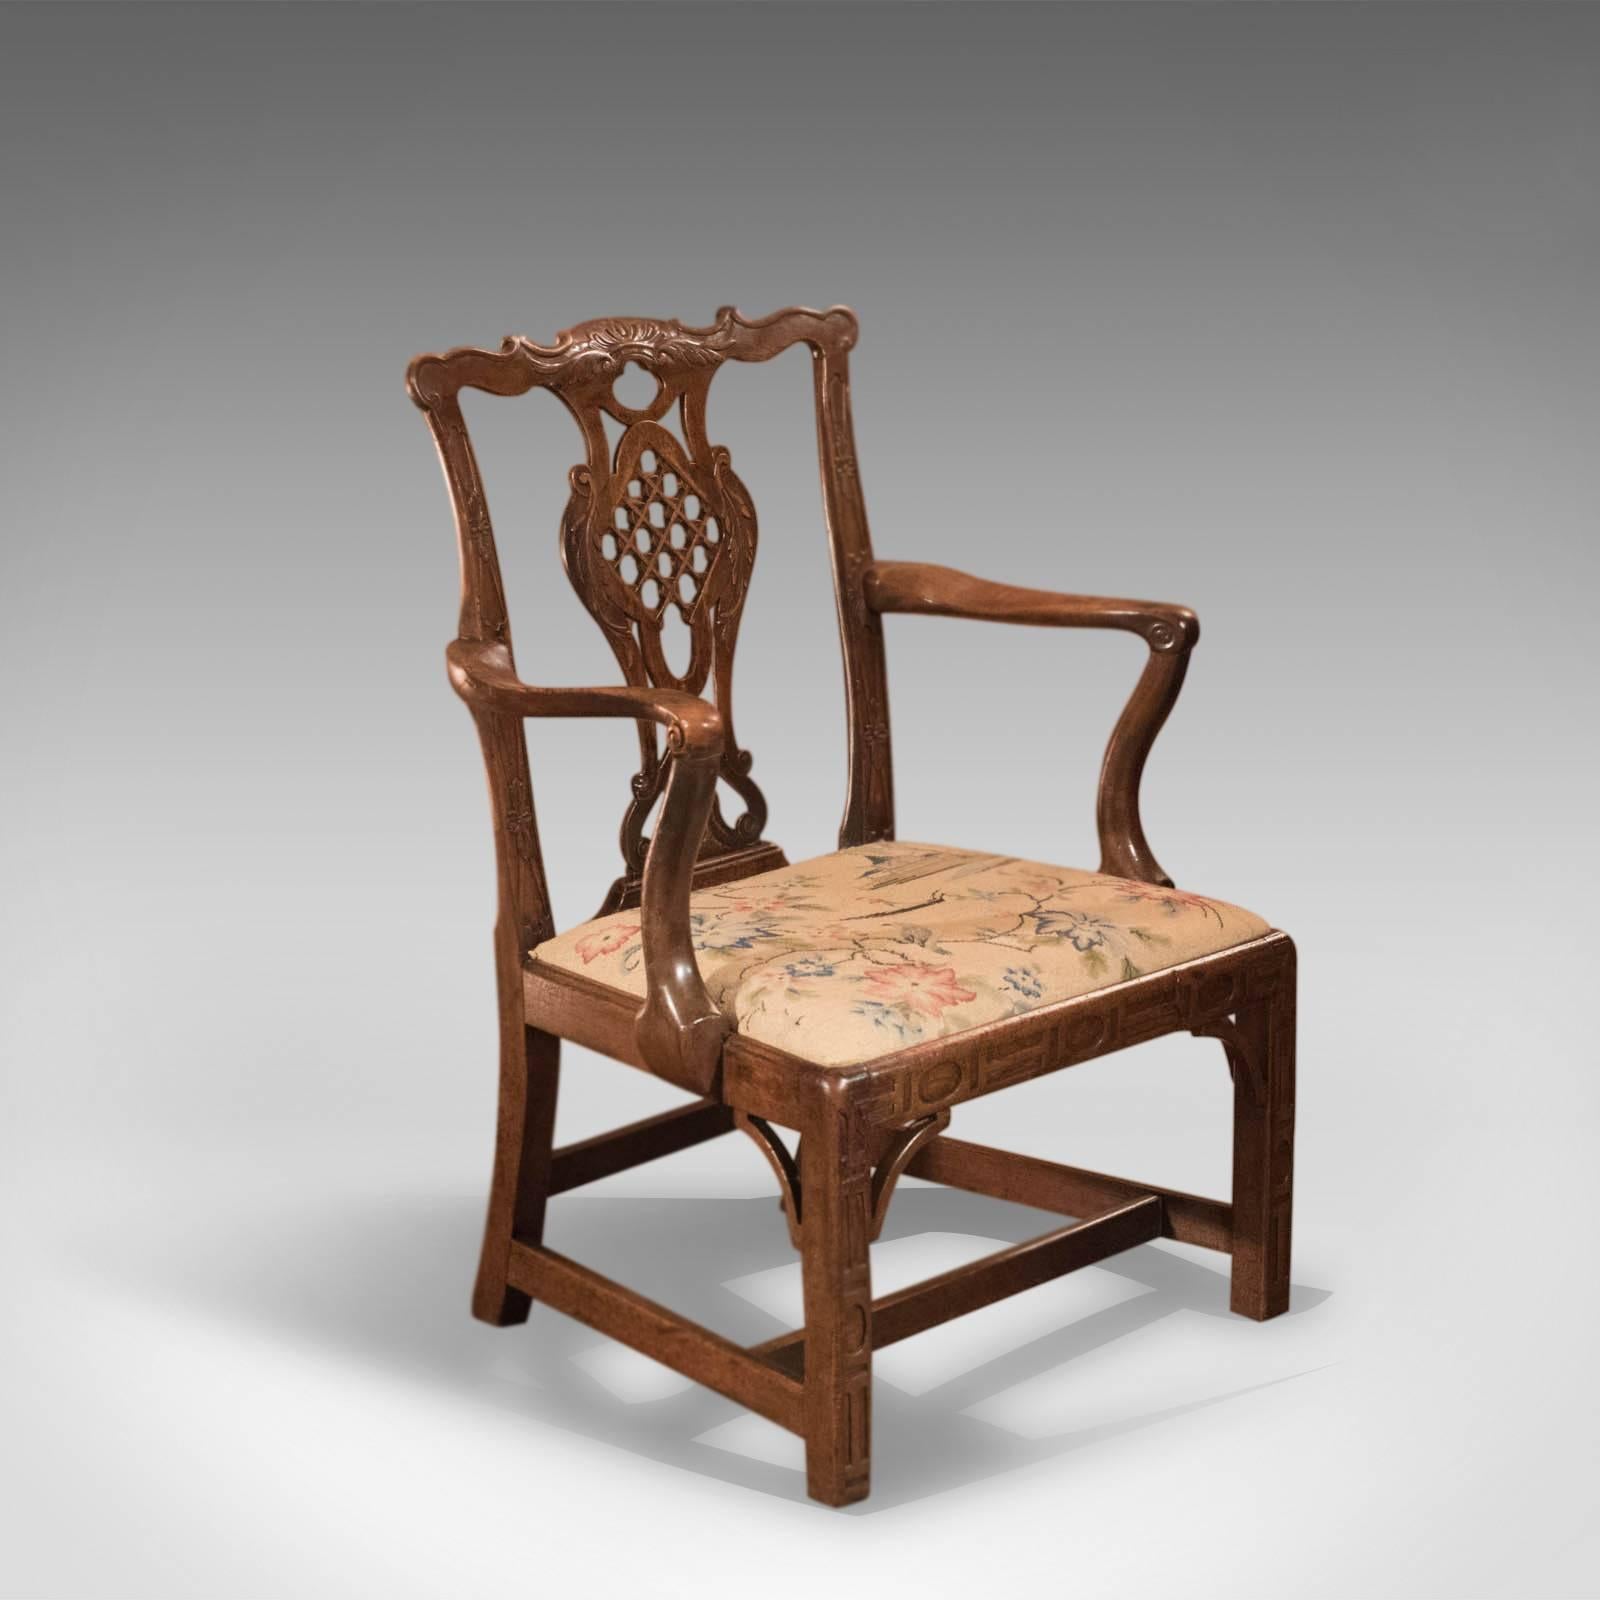 This is an antique, elbow chair with a Chinese lattice back splat, after the designs of Robert Mainwaring dating to the mid-18th century, circa 1760.

With all the hallmarks of Manwaring's designs this is a fine example from the period. Raised on